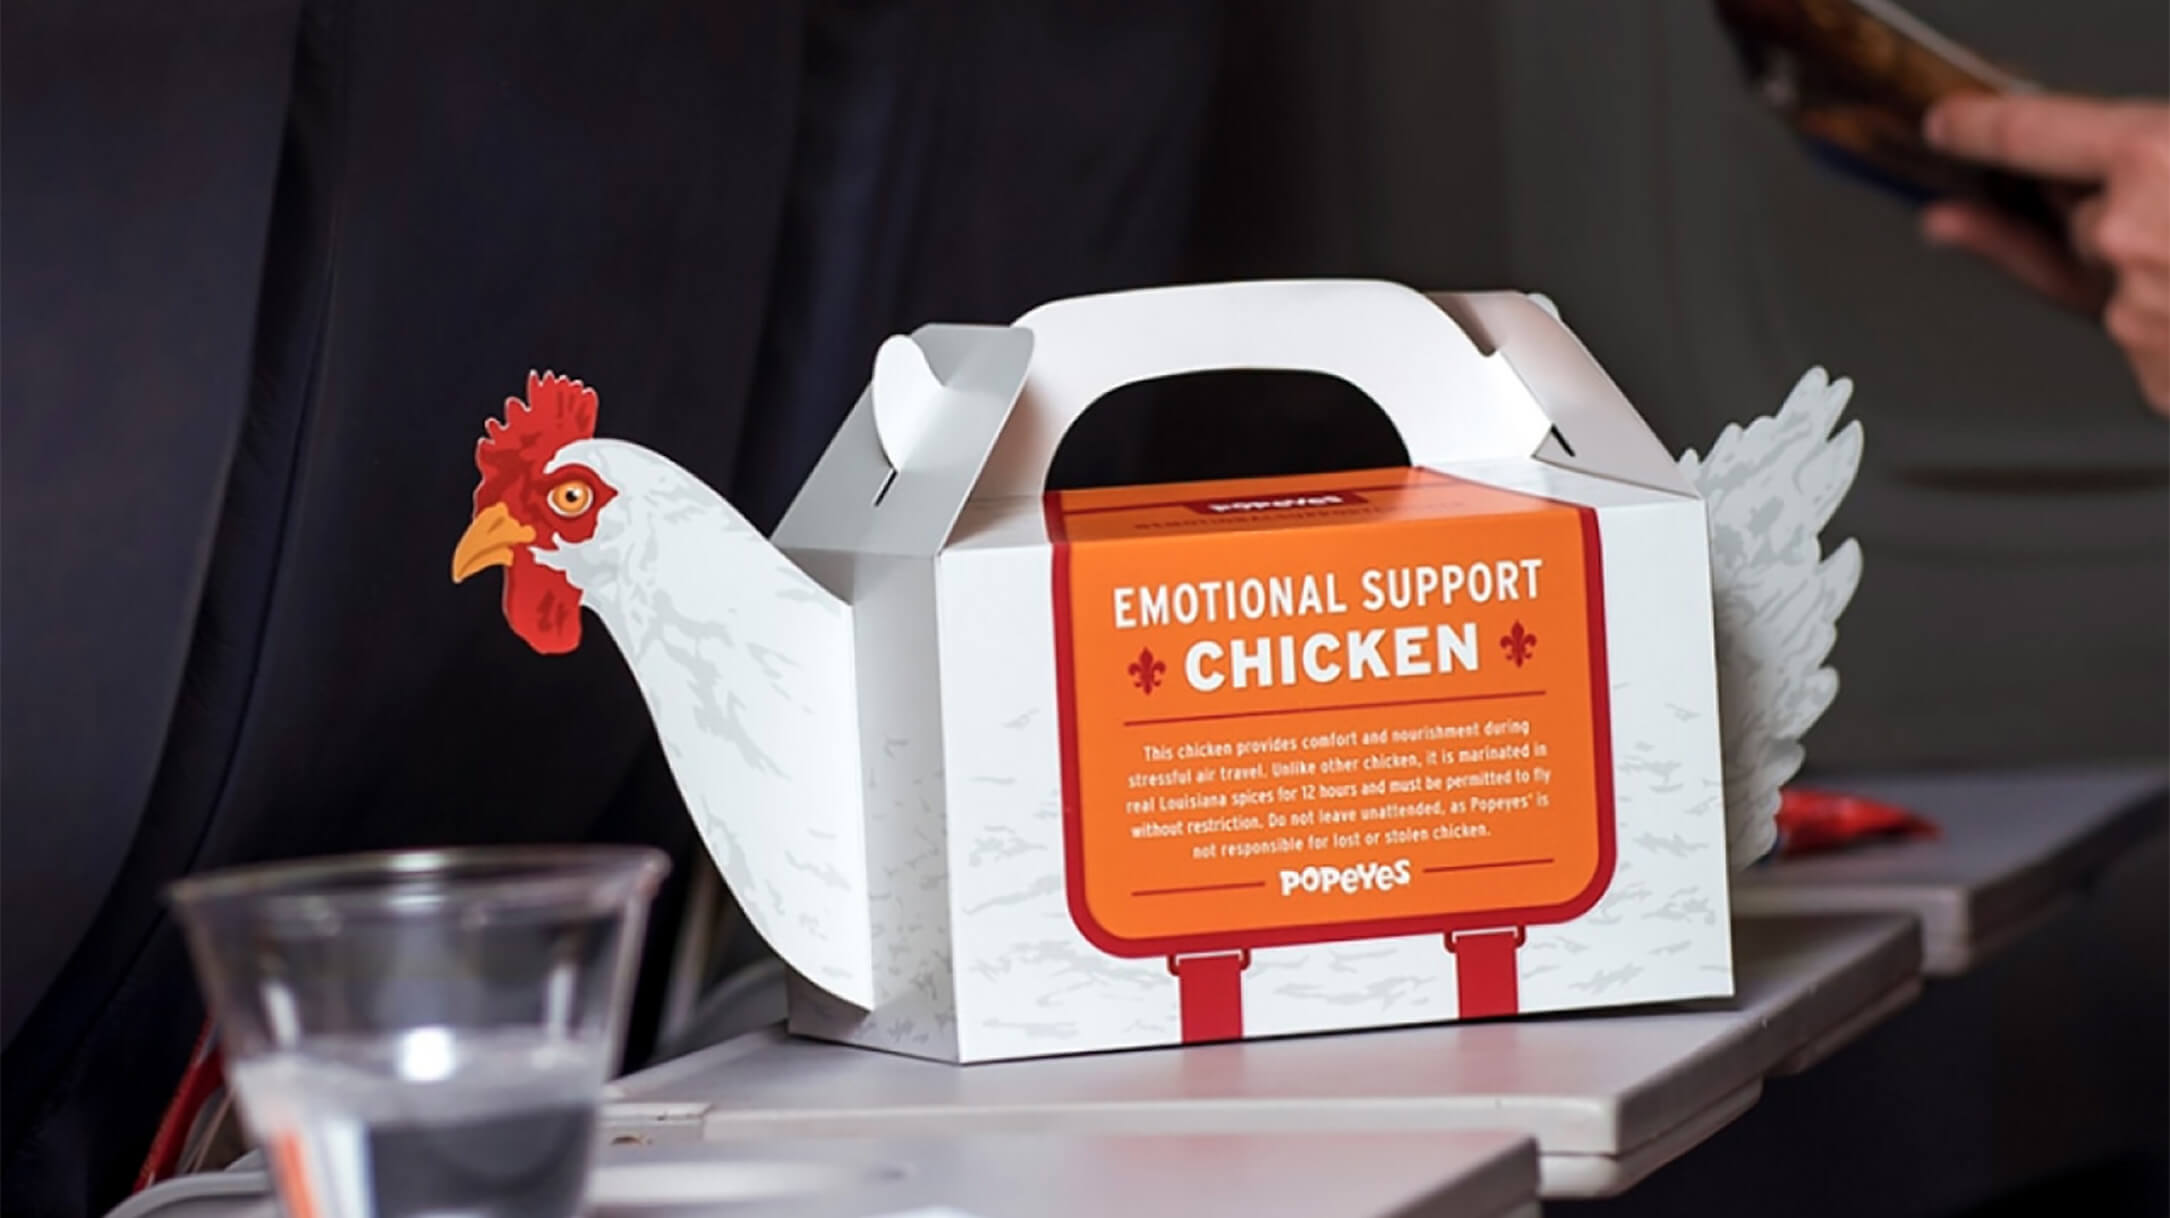 take-away box from Popeyes in shape of a chicken